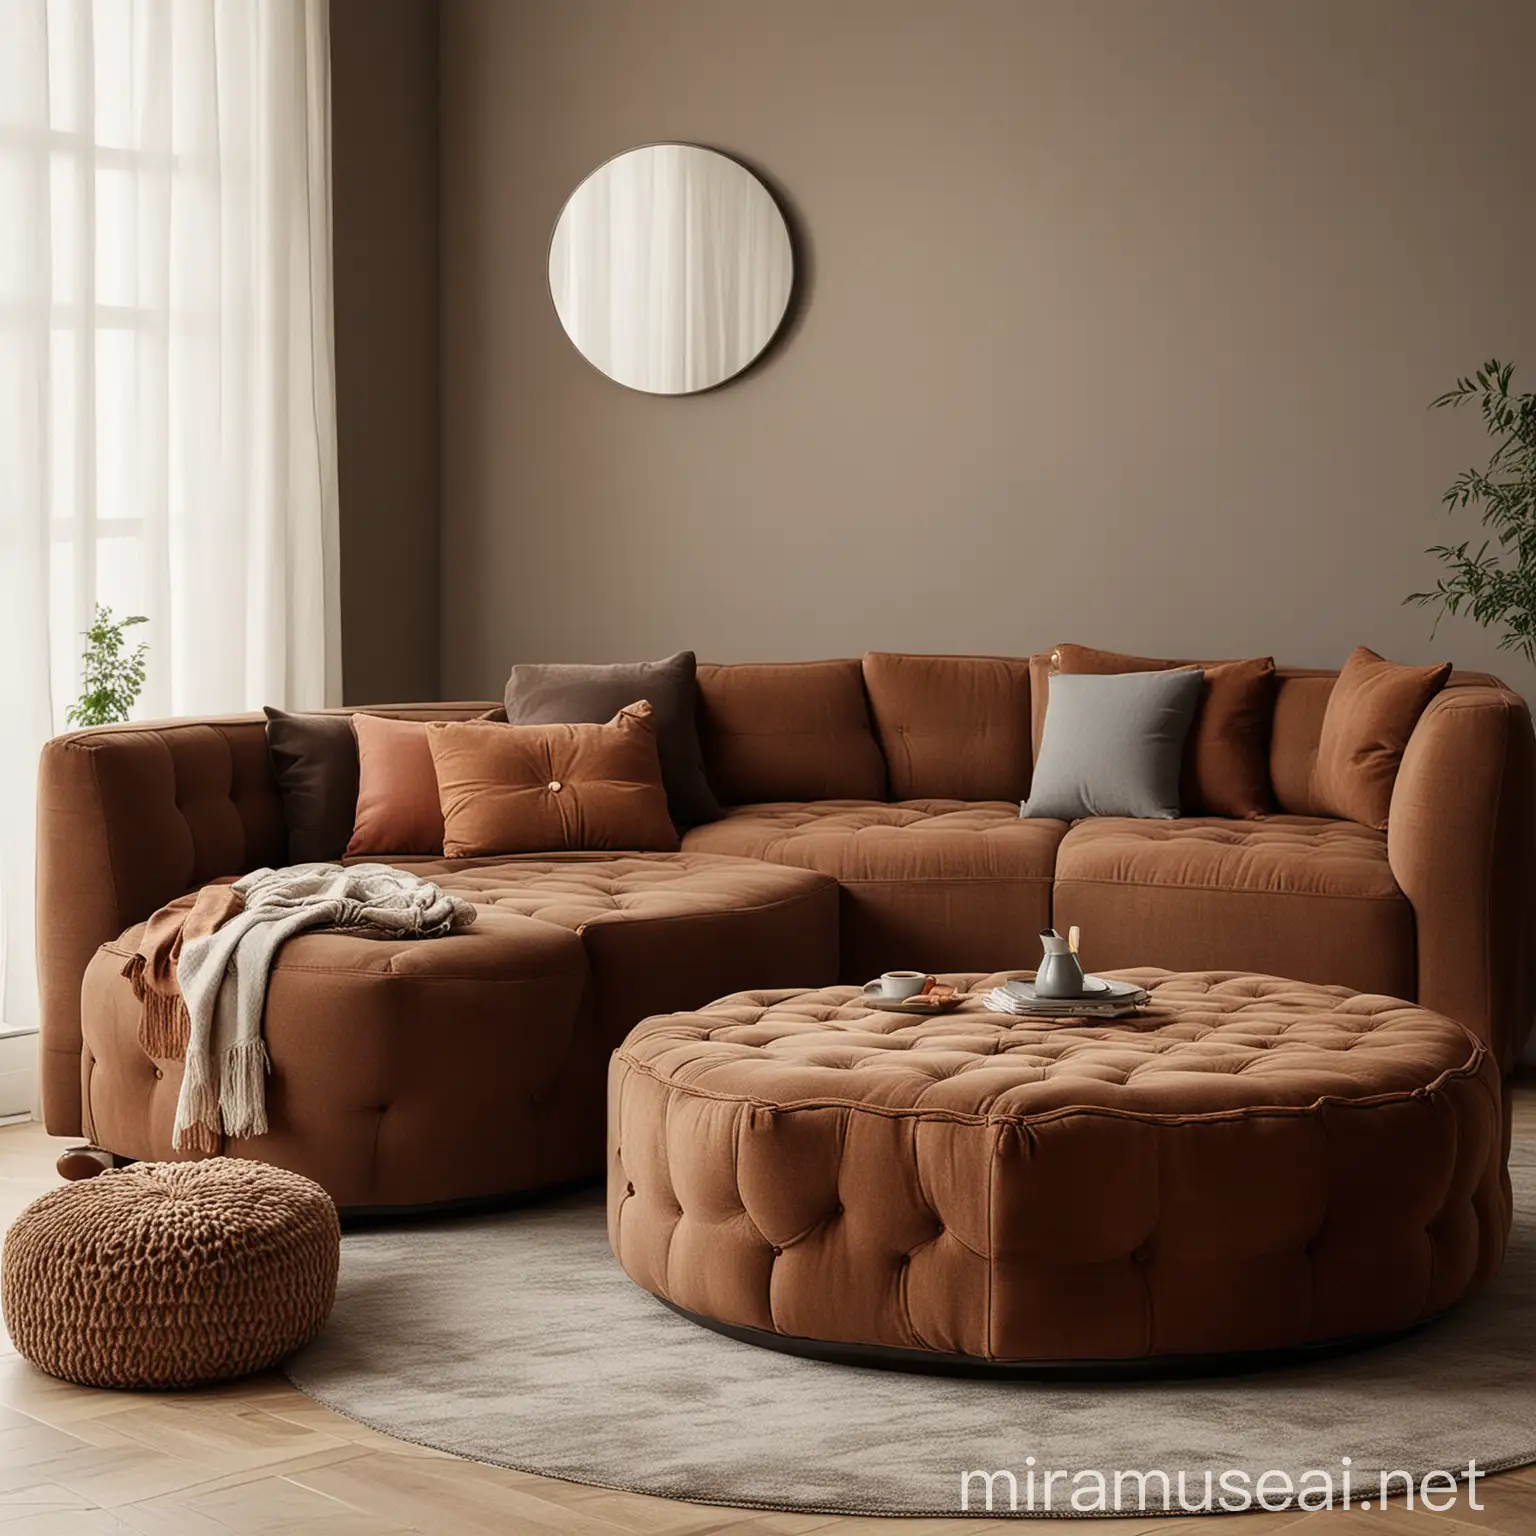 Cozy Living Room with Plush Couch and Ottoman